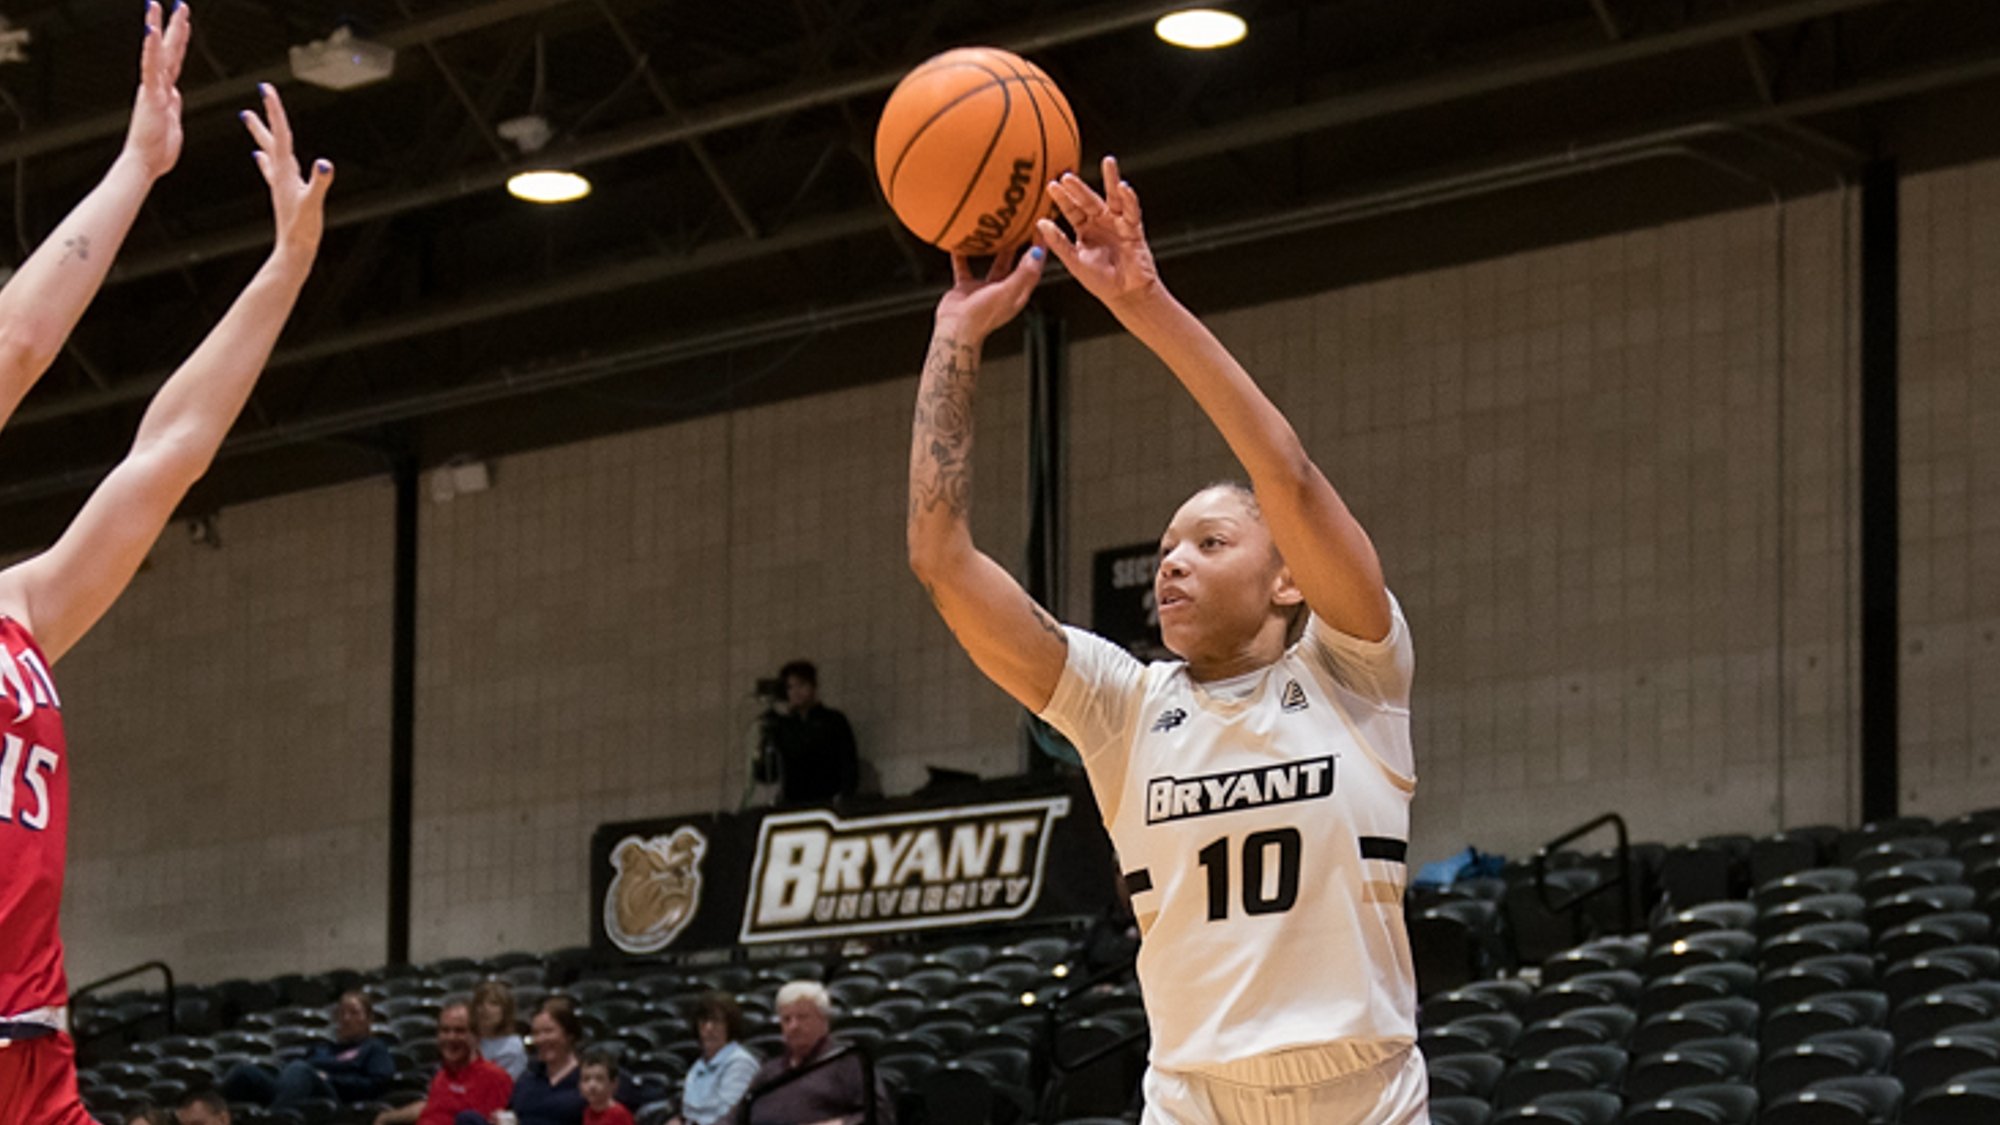 Fortuny and Reynolds lift the Bulldogs past NJIT at home